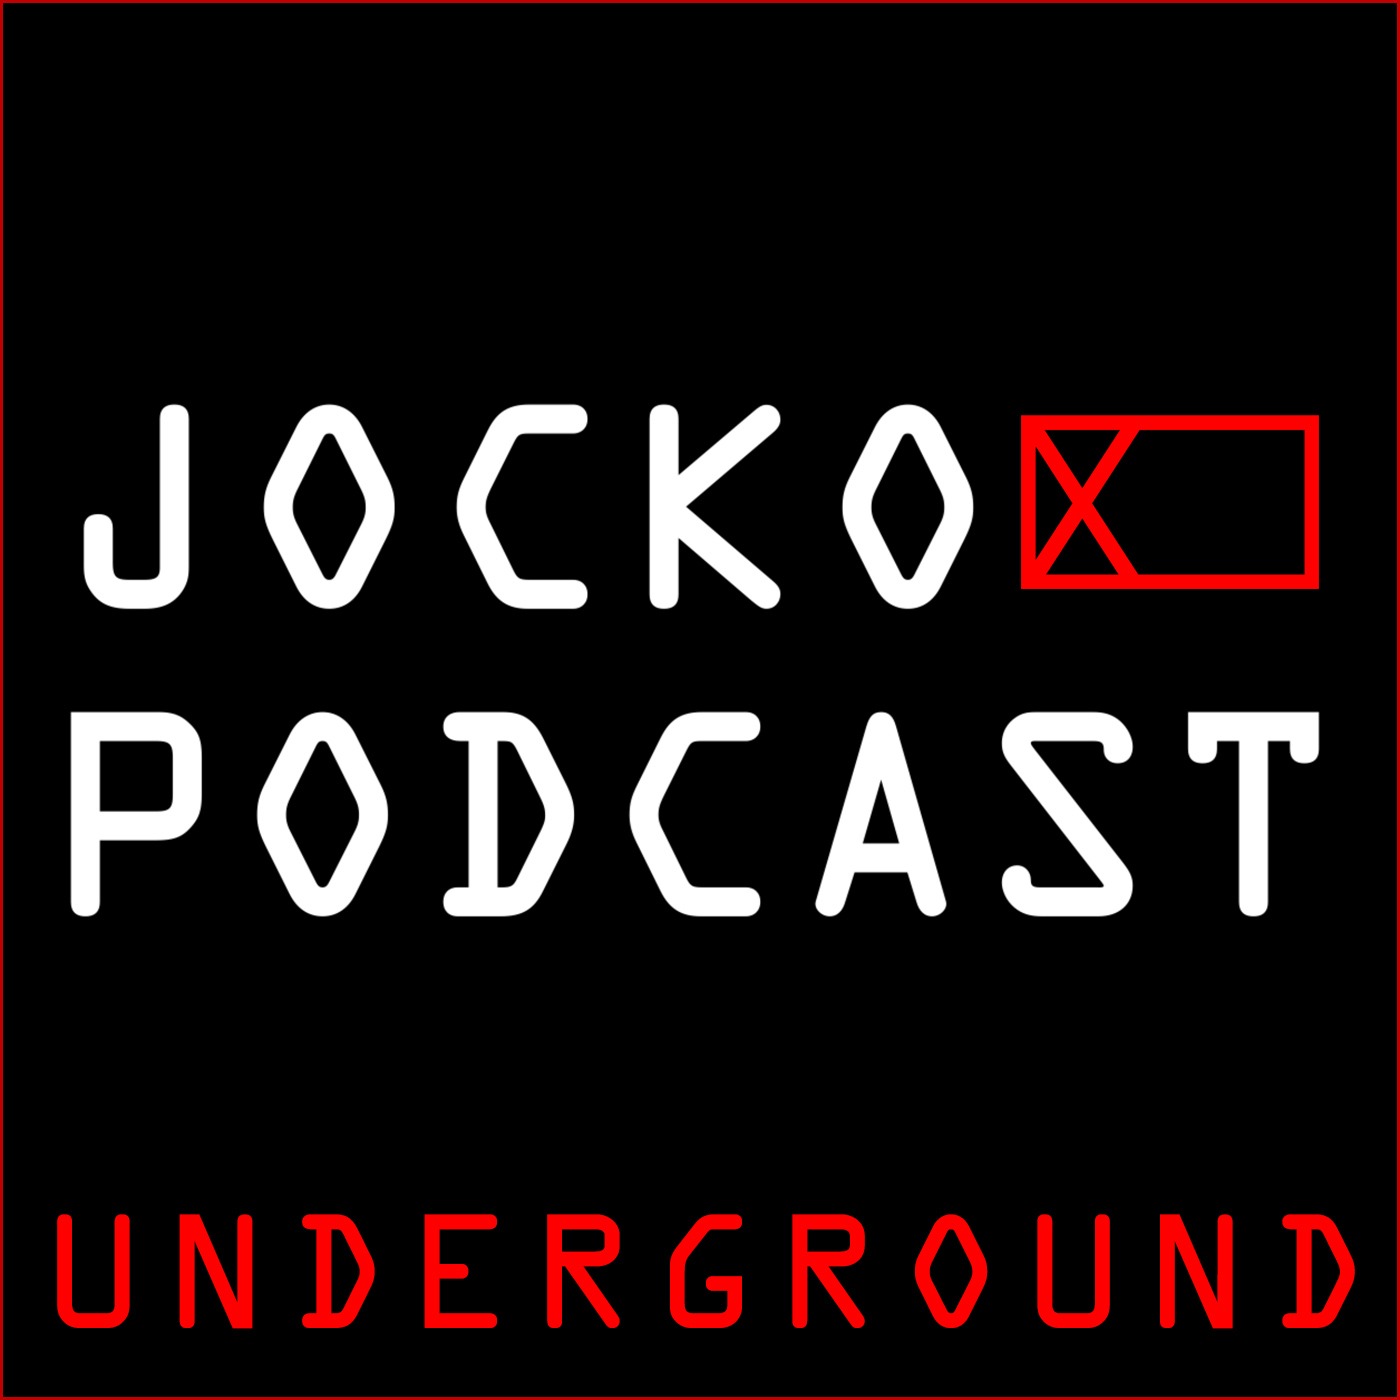 Jocko Underground: Why Your Life Plan Might Now Work. Our Problems in the World Today.